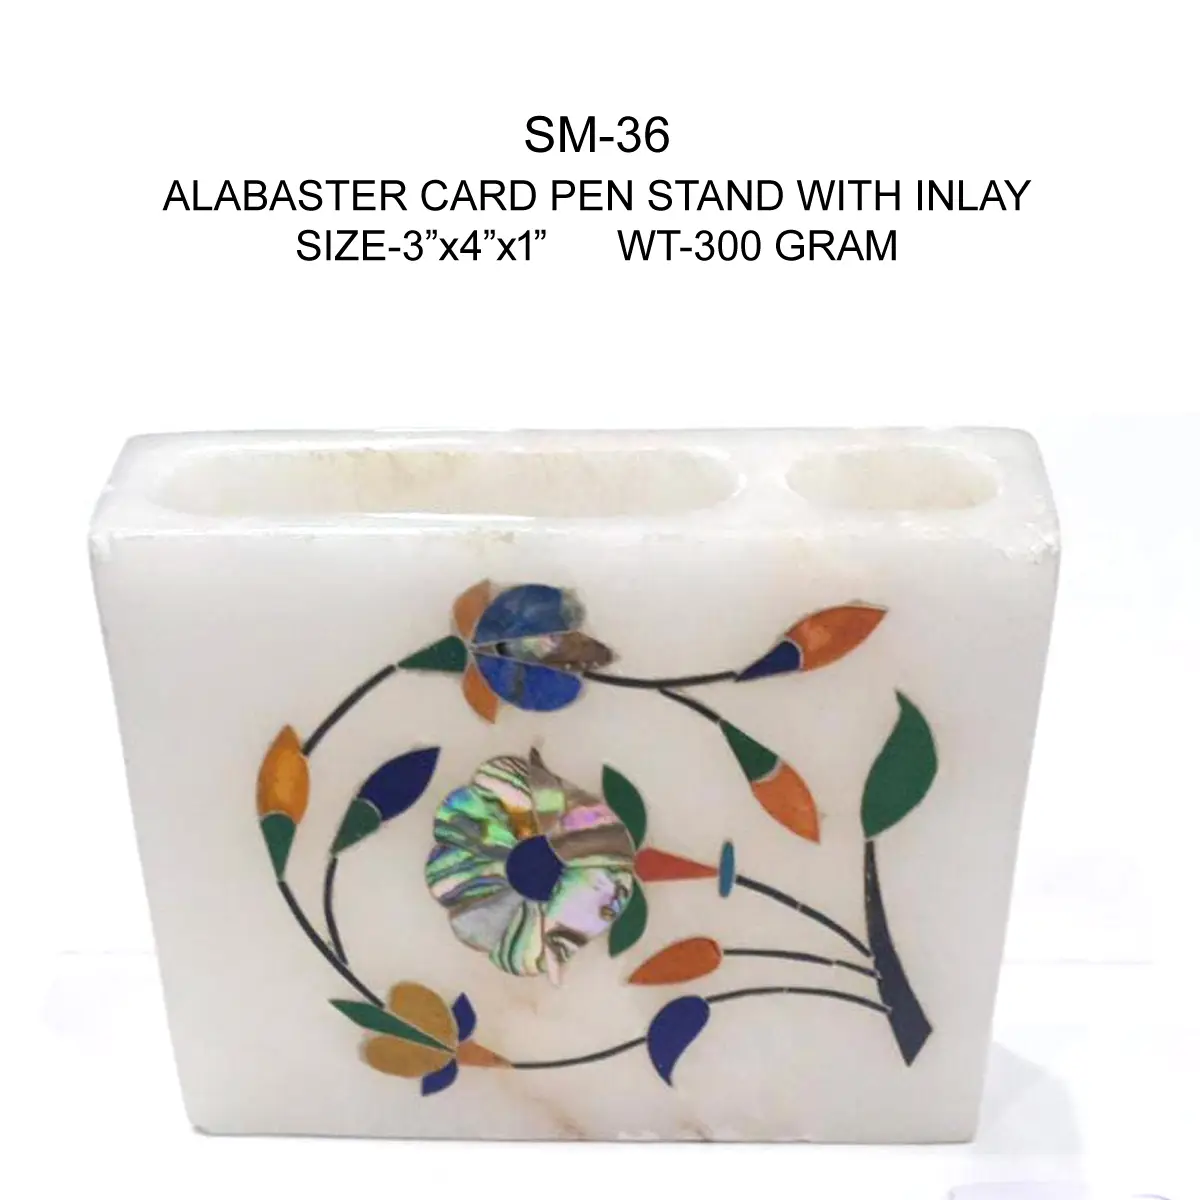 ALABASTER CARD PEN STAND WITH INLAY